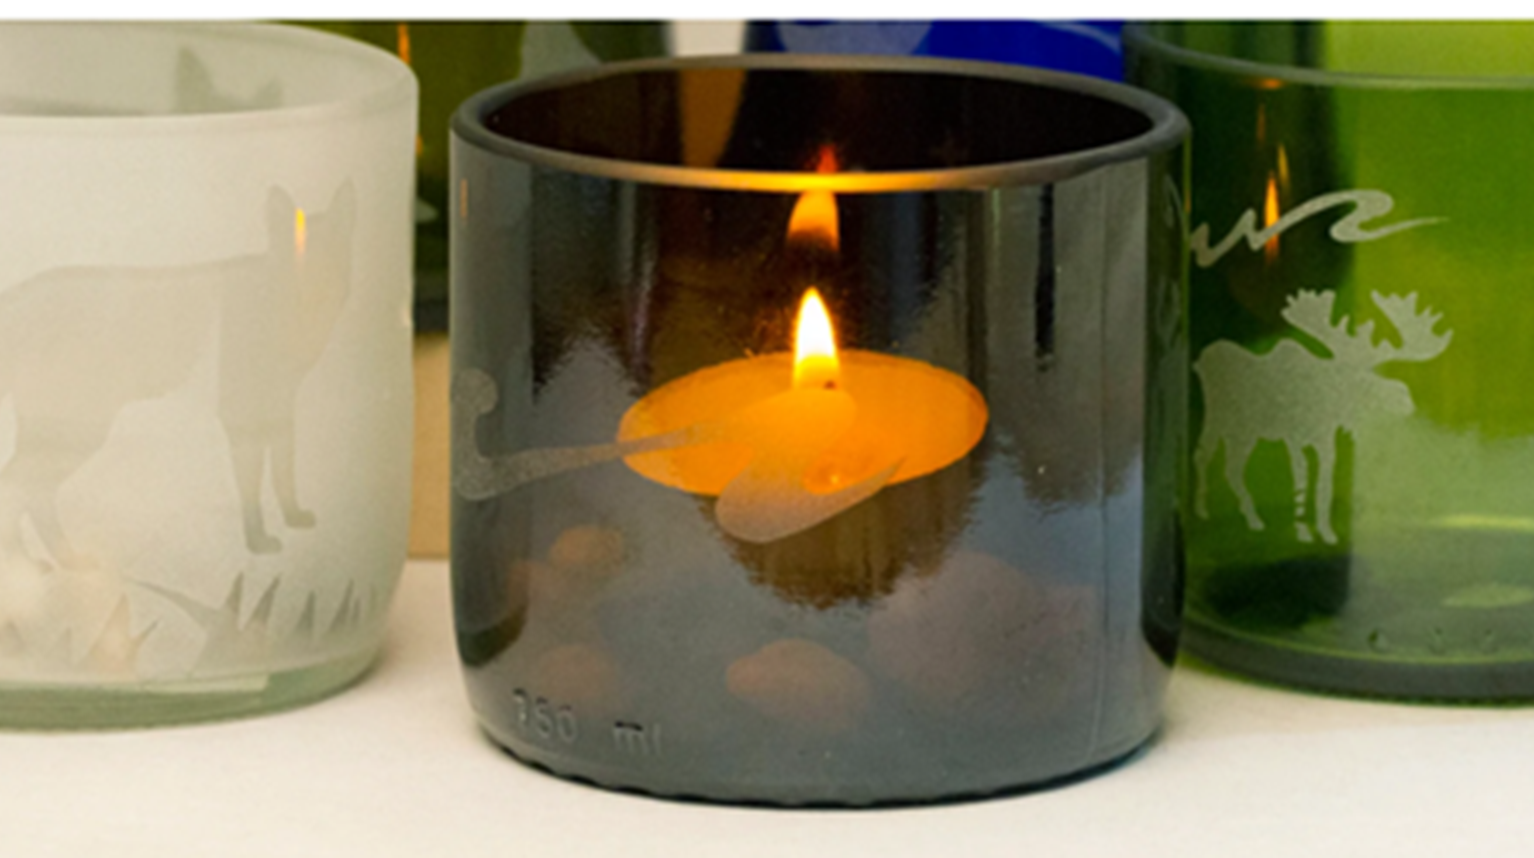 Three etched-candle glassware with one lit candle inside.